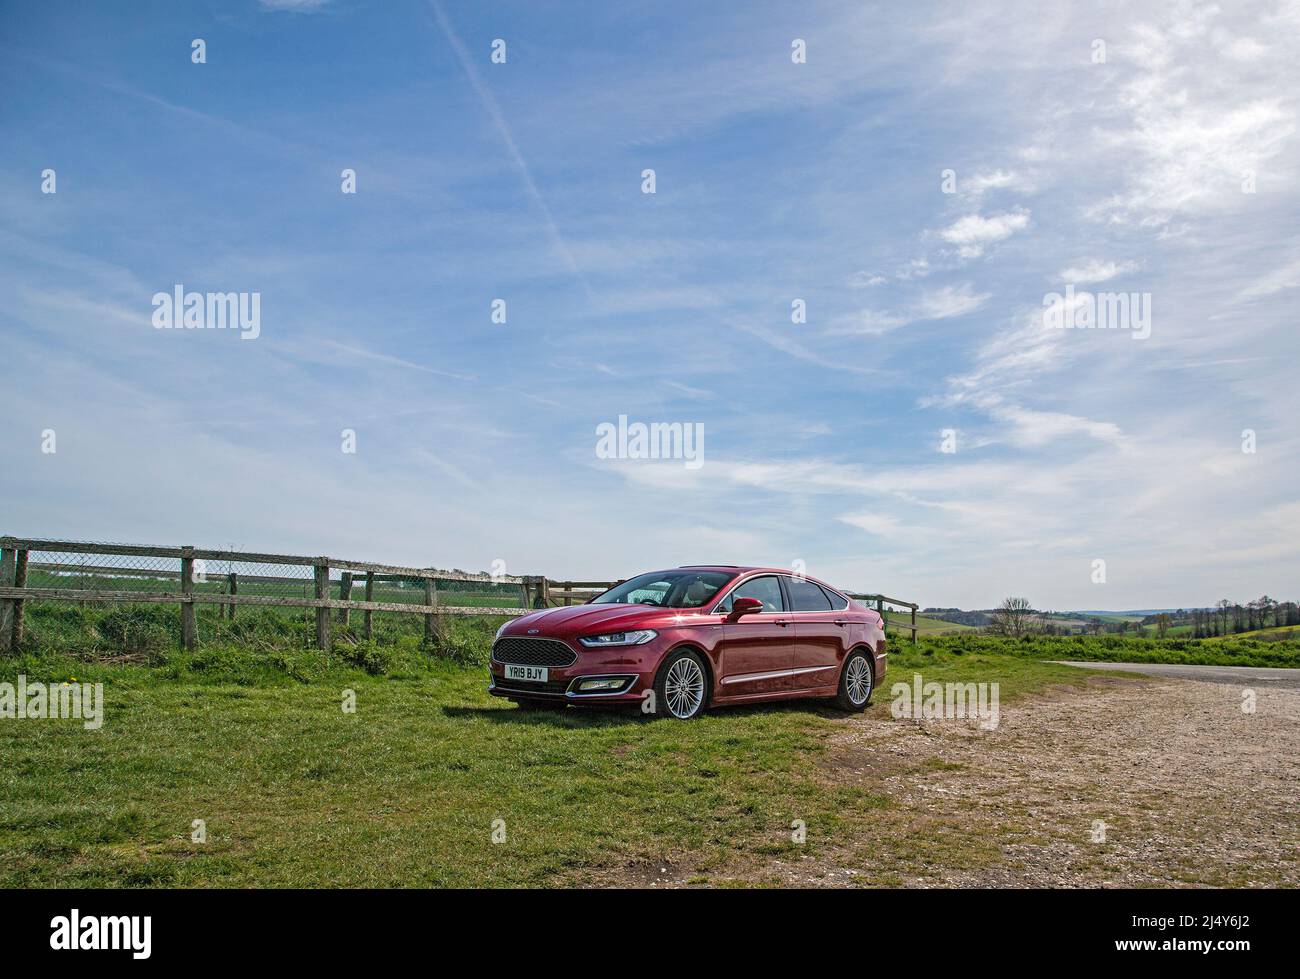 A stunning Ford Mondeo Vignale saloon parked off road in a field off the A338 at Fawley, West Berkshire, UK Stock Photo